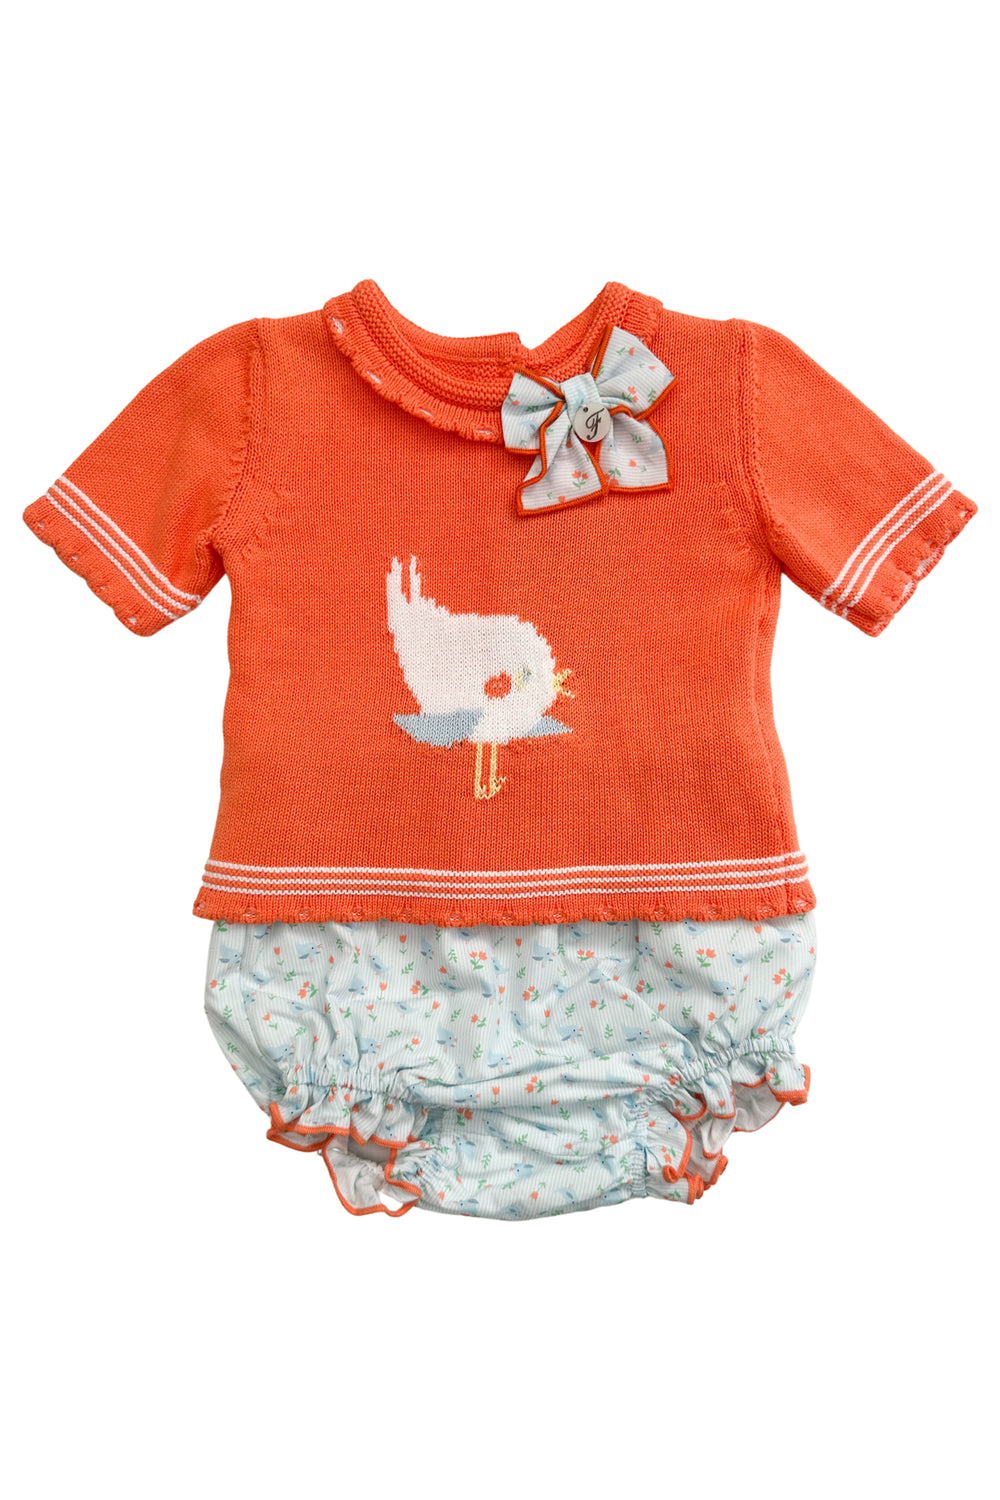 Foque PREORDER "Hallie" Coral Knit Top & Bird Print Bloomers | Millie and John